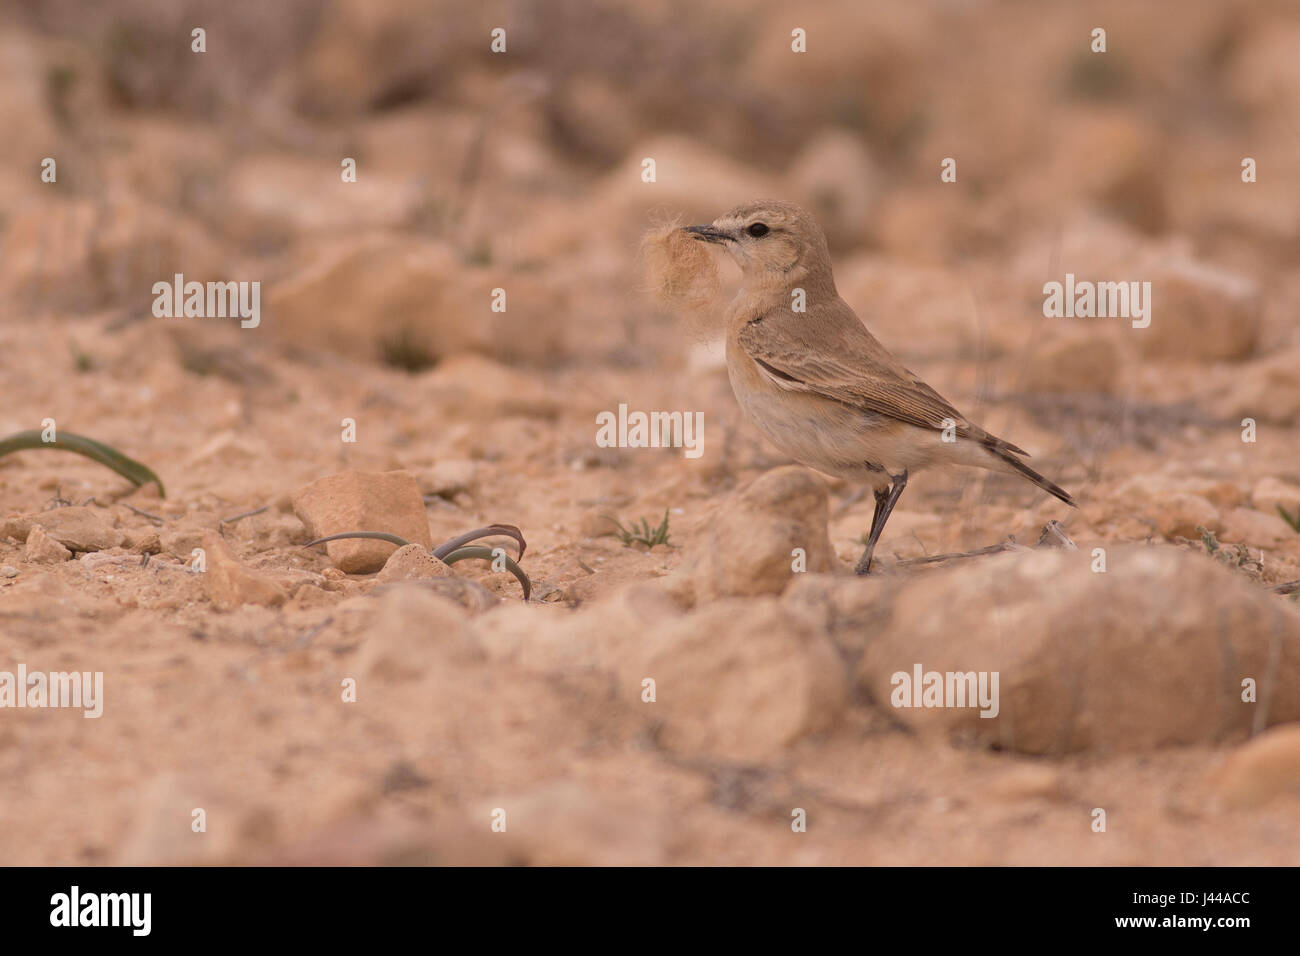 Female Northern Wheatear (Oenanthe oenanthe) an Old World flycatcher, Photographed in Israel in March Stock Photo